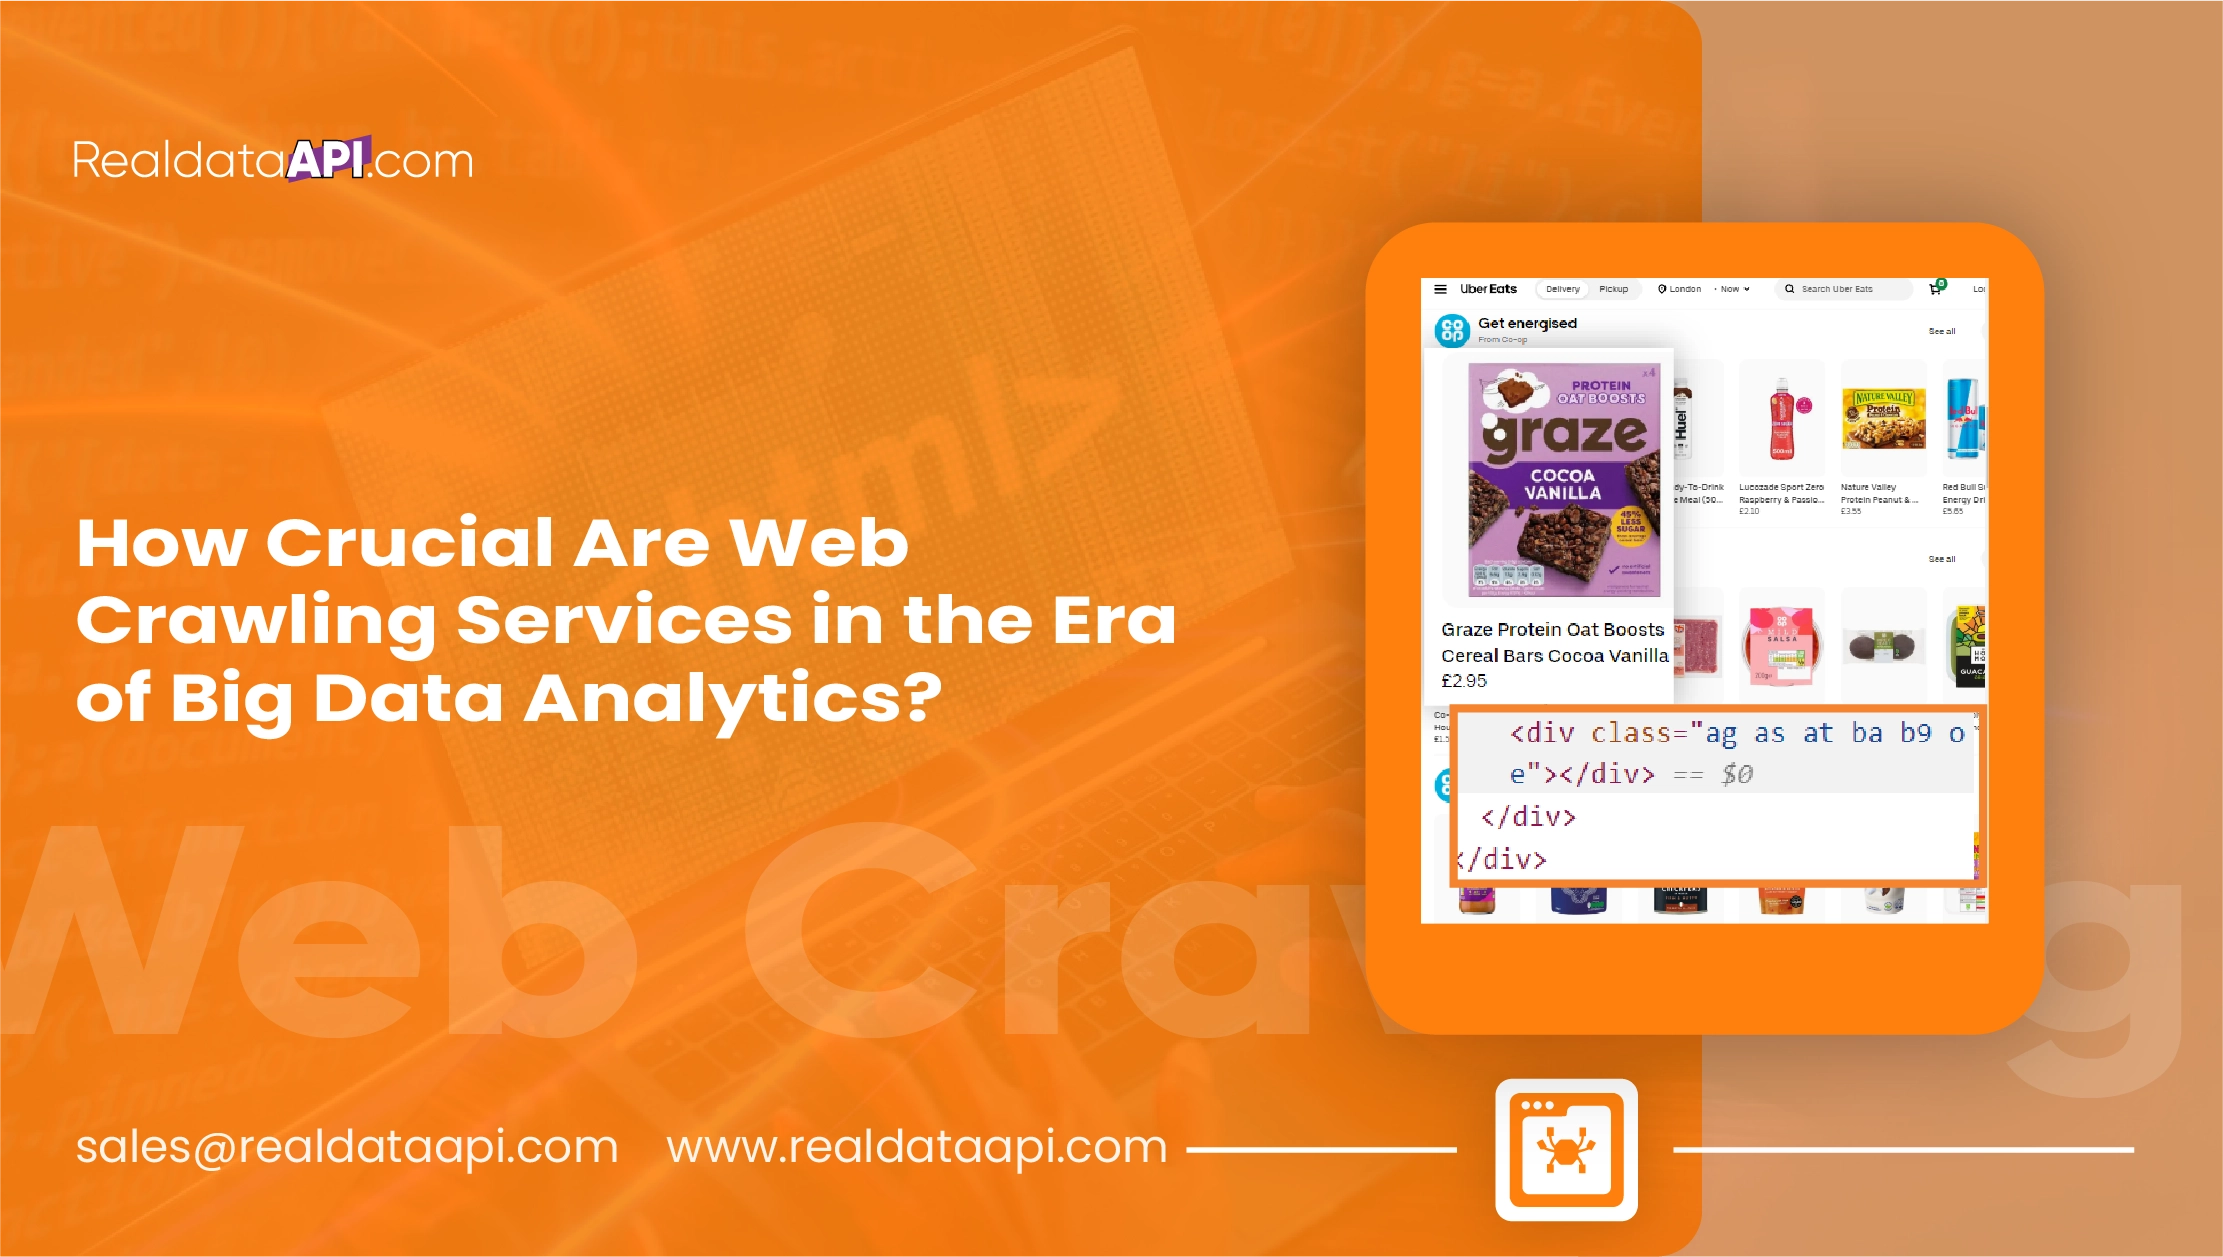 How-Crucial-Are-Web-Crawling-Services-in-the-Era-of-Big-Data-Analytics